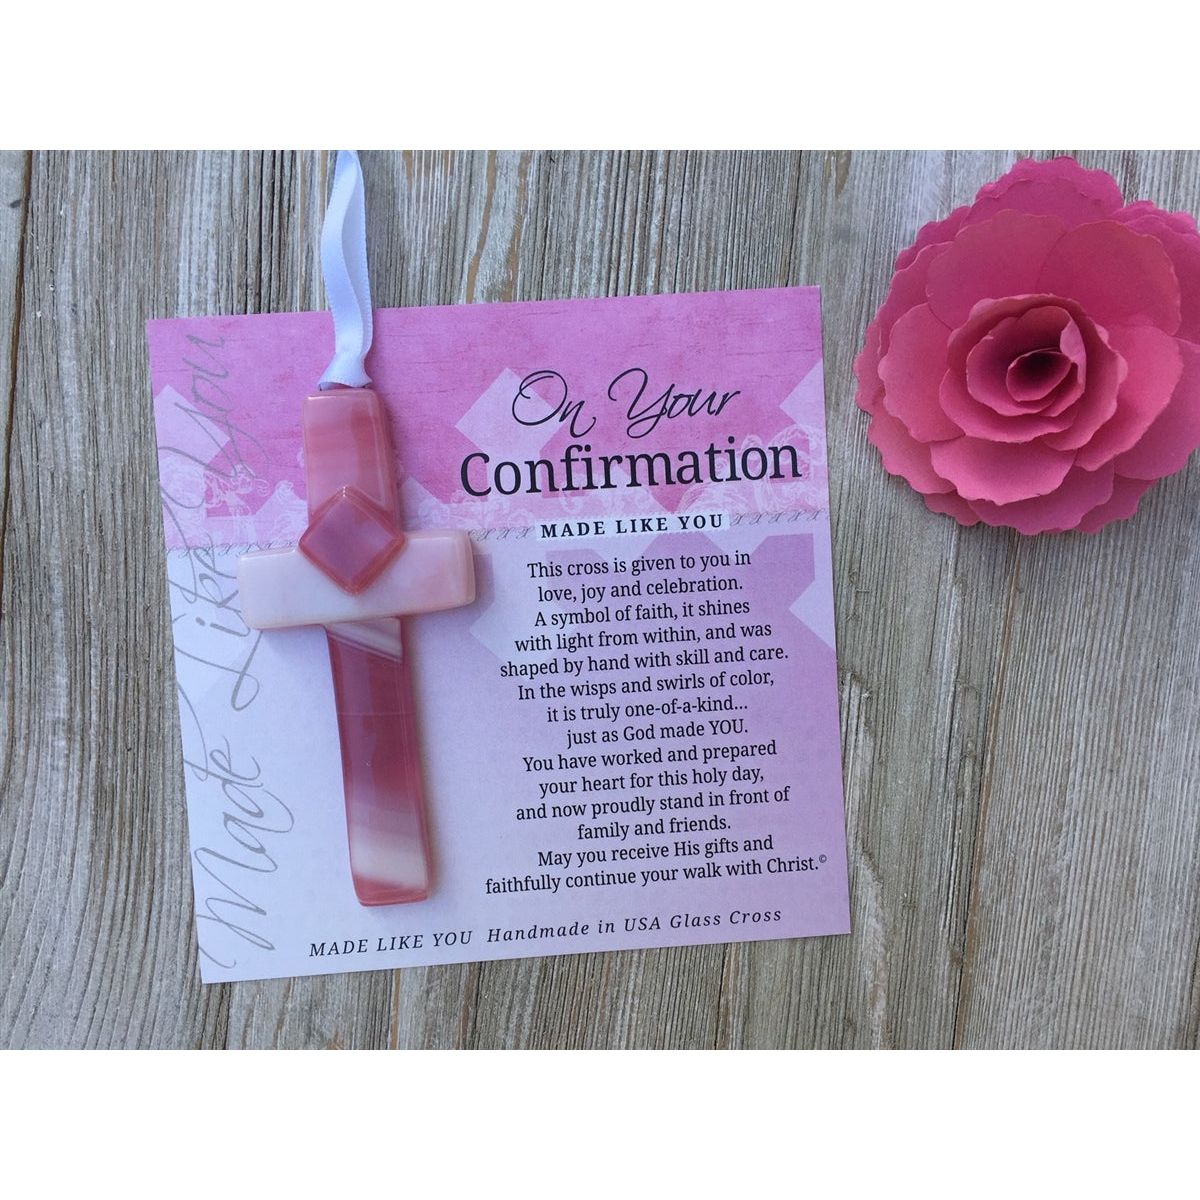 Pink glass cross and artwork with confirmation sentiment gift.